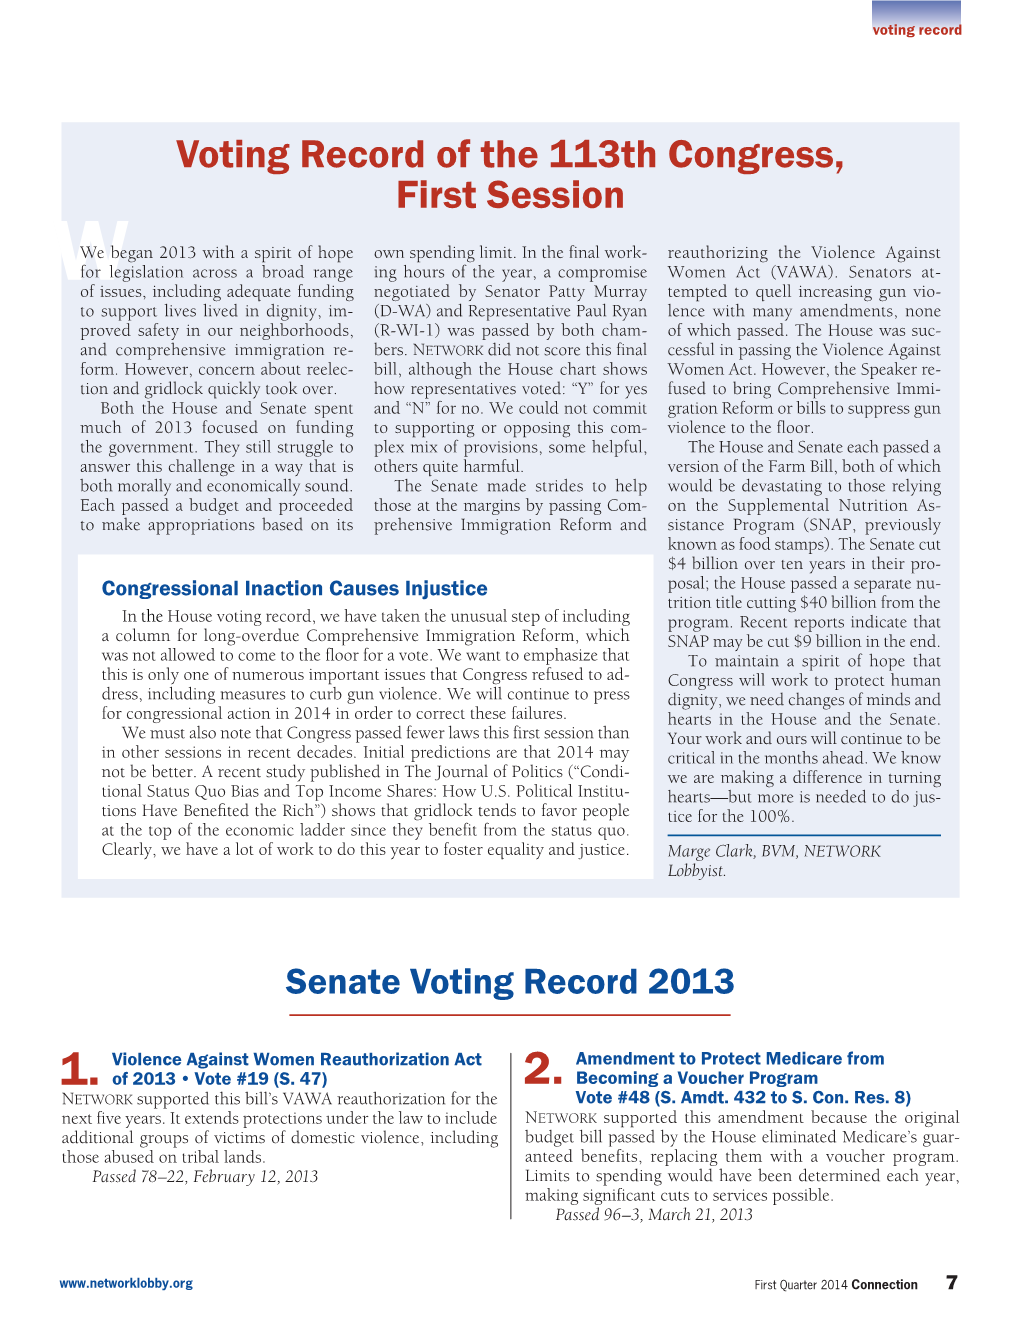 2013 Congressional Voting Record